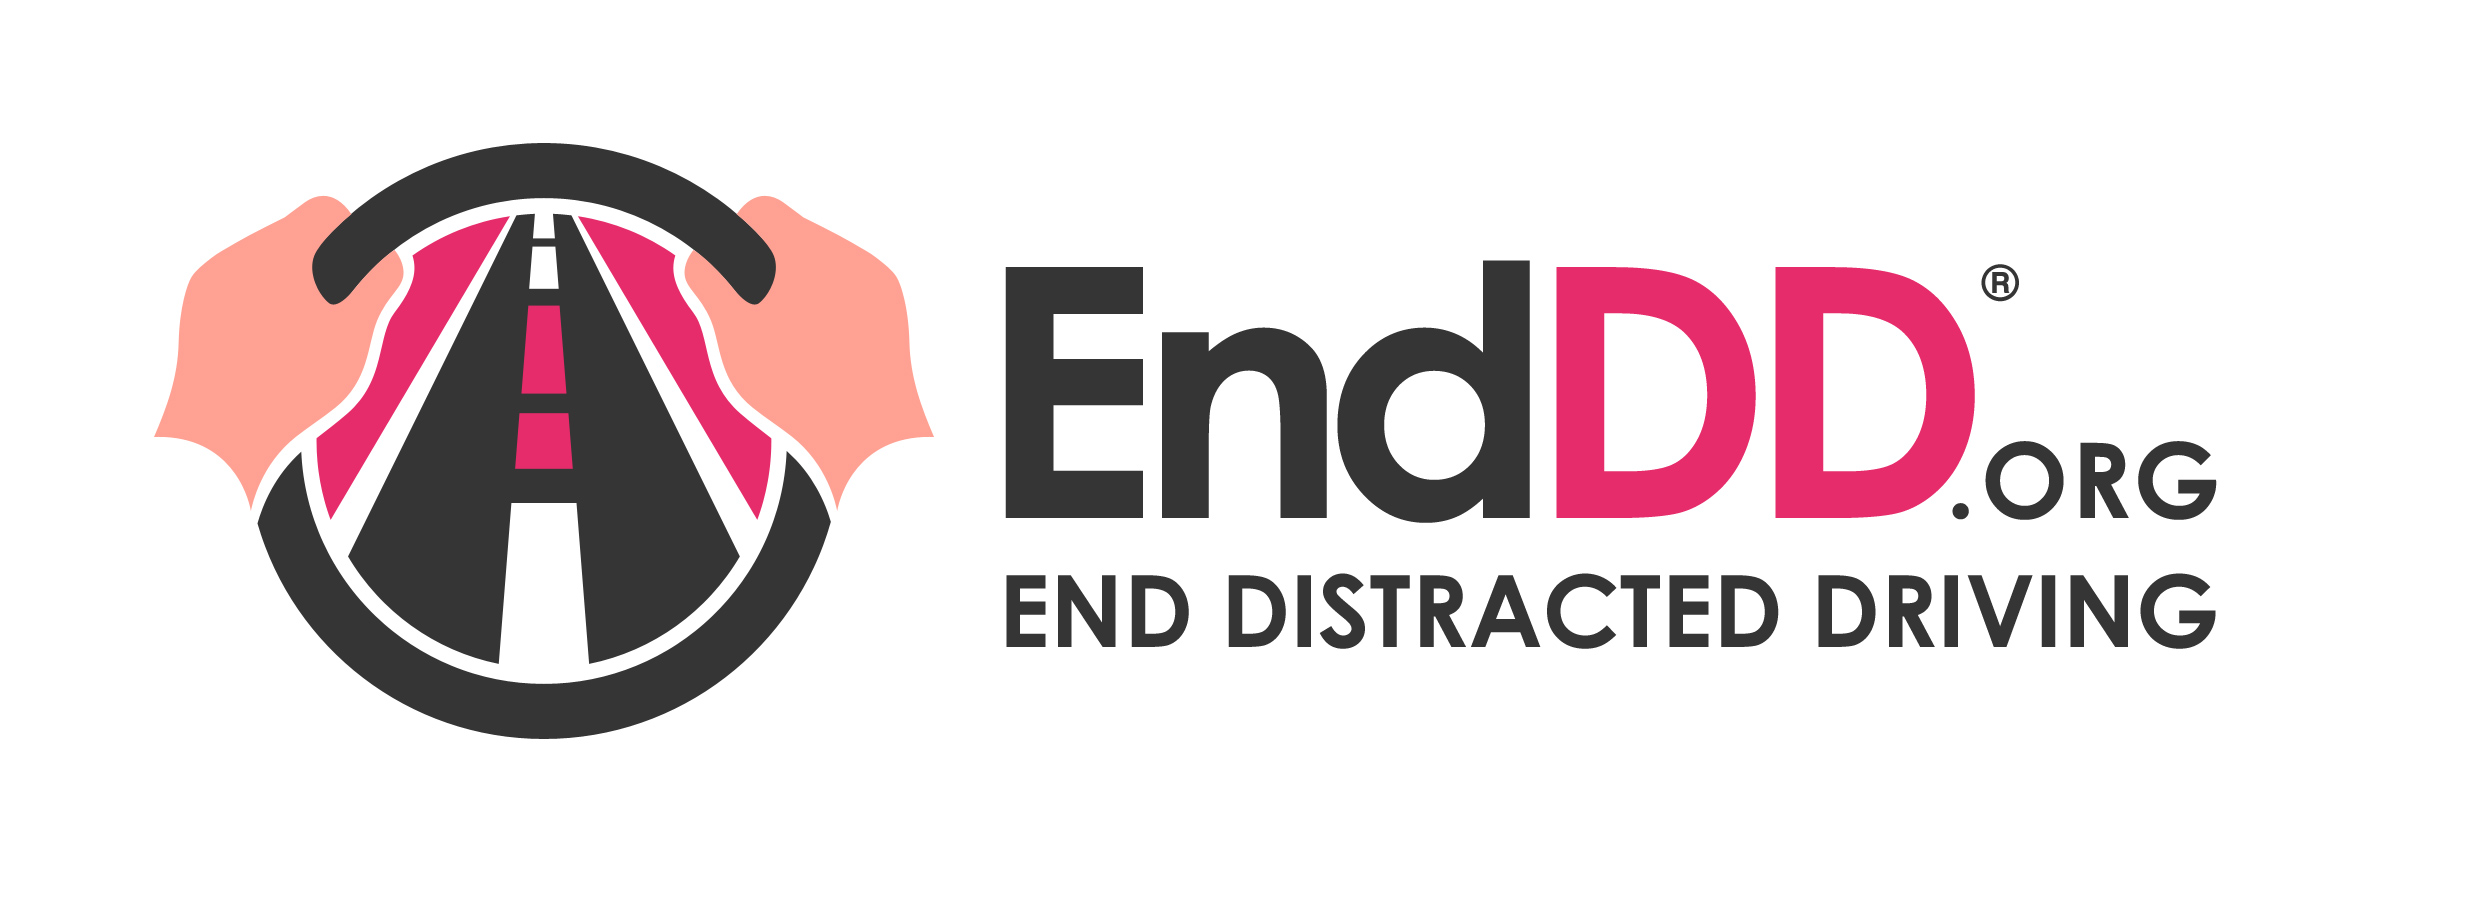 End Distracted Driving (EndDD.org) Logo